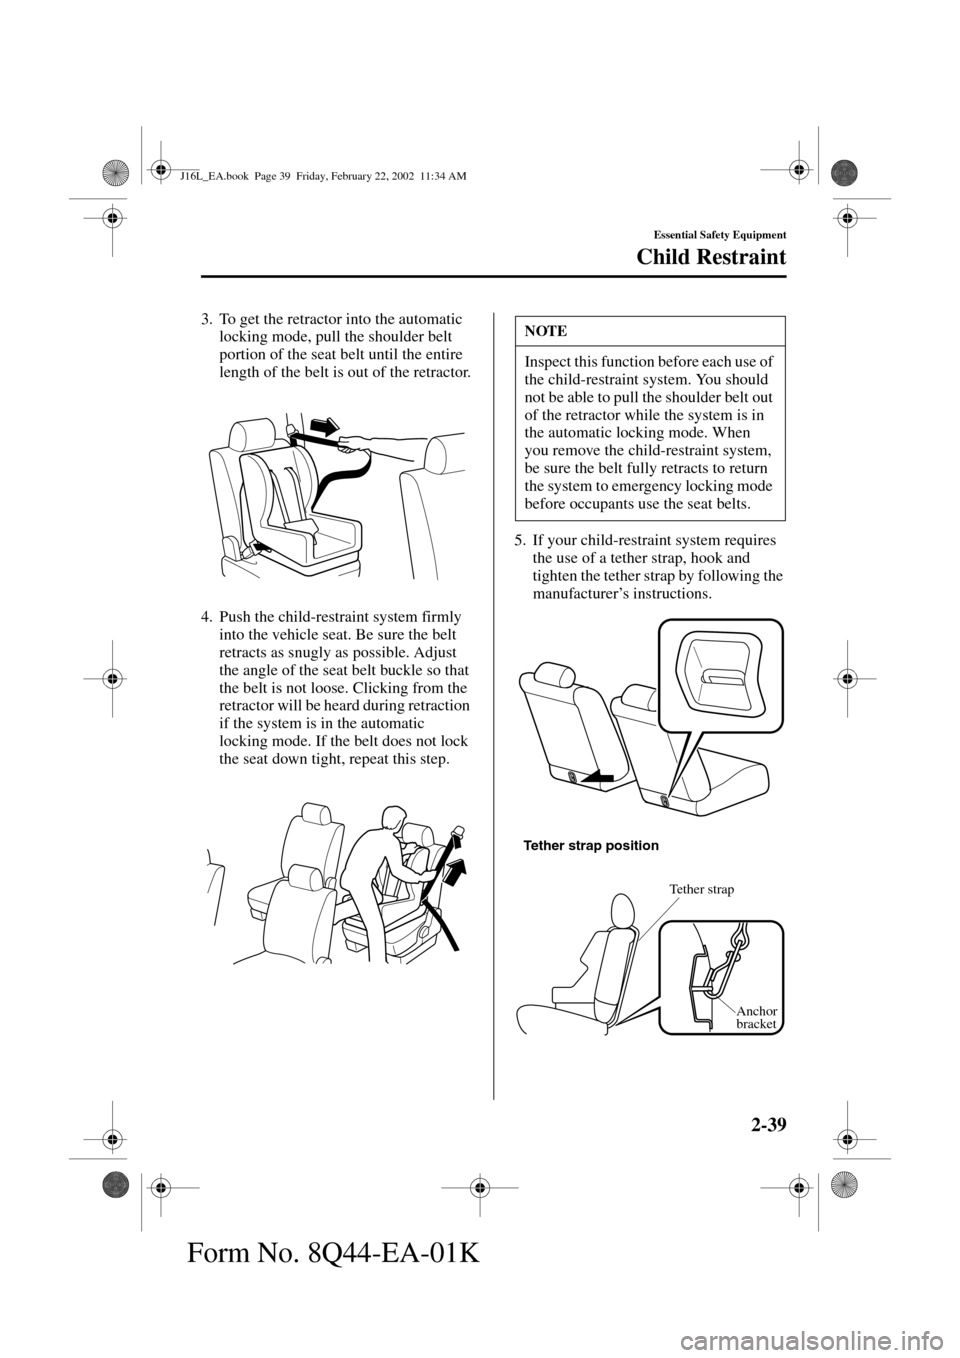 MAZDA MODEL MPV 2002  Owners Manual (in English) 2-39
Essential Safety Equipment
Child Restraint
Form No. 8Q44-EA-01K
3. To get the retractor into the automatic 
locking mode, pull the shoulder belt 
portion of the seat belt until the entire 
length